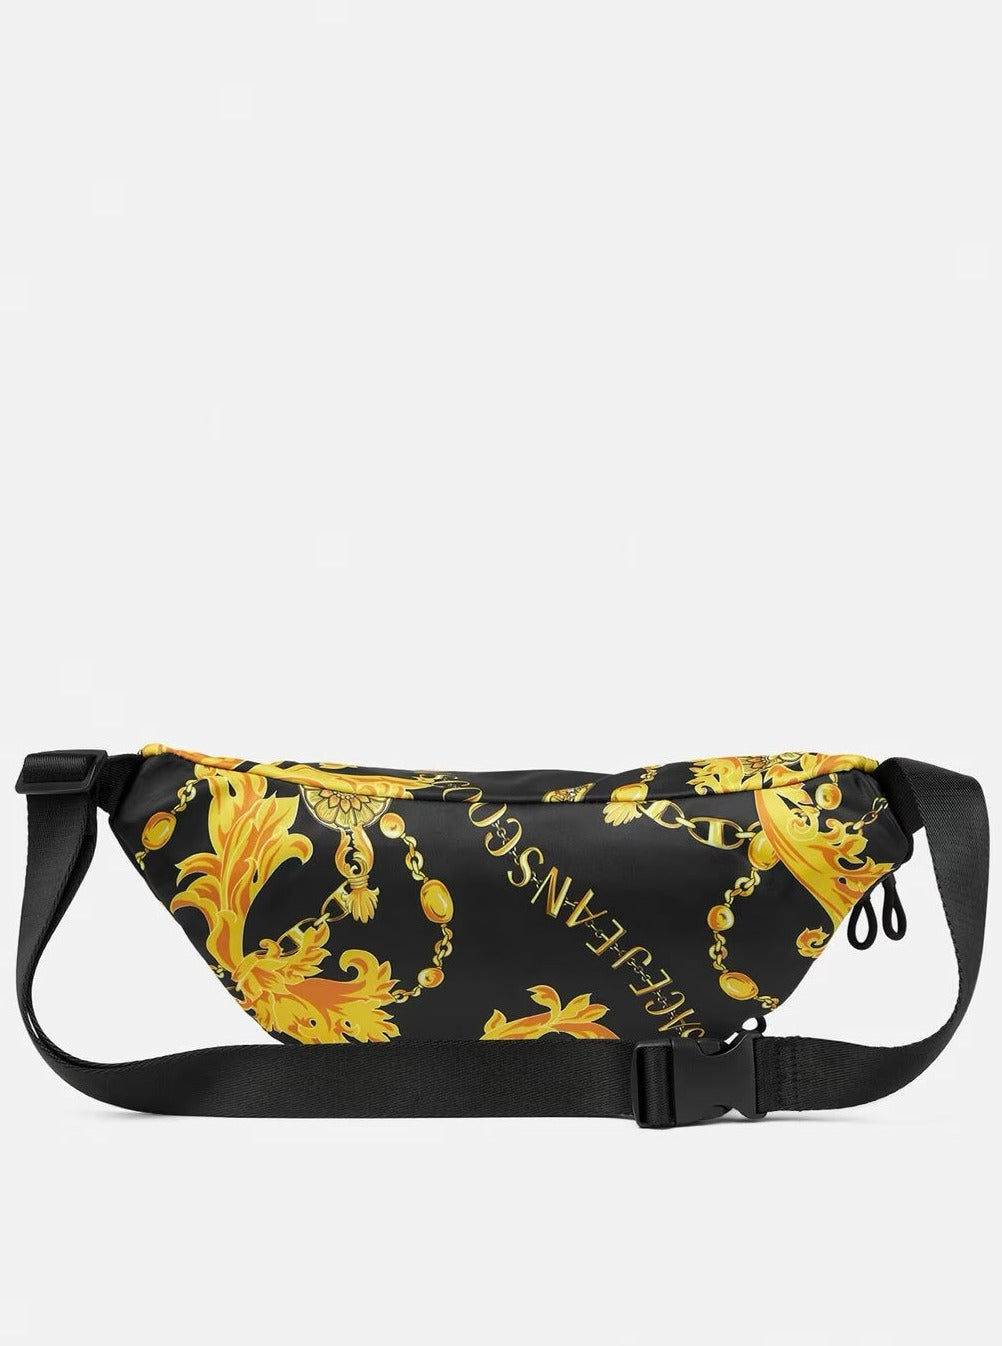 Versace Jeans Couture Range Iconic Bag Printed Logo